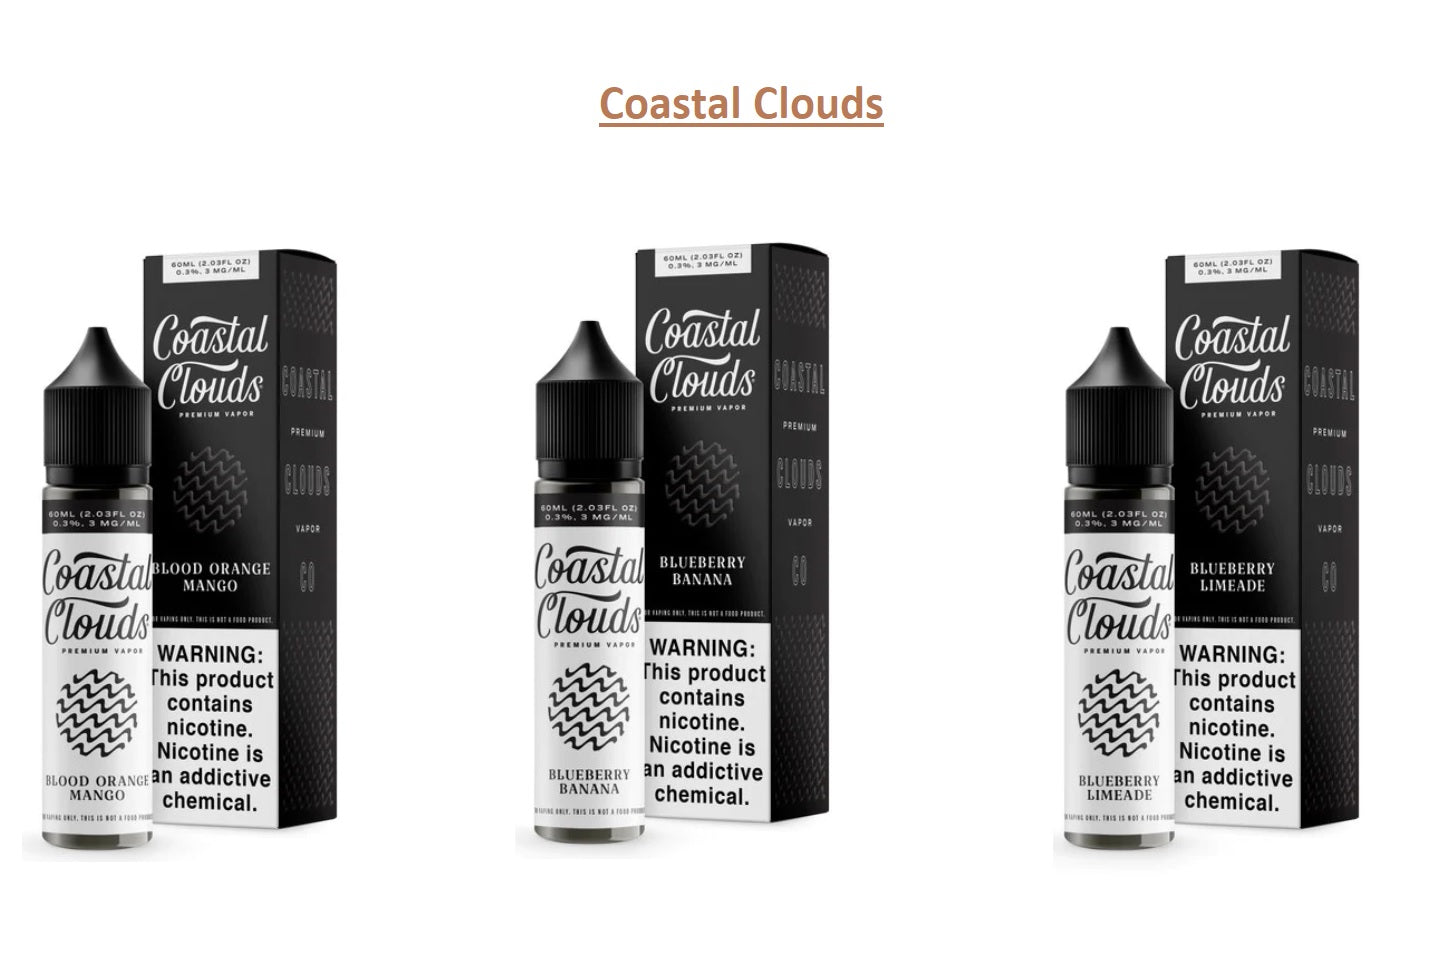 Picking Coastal Clouds Vape Juice Every Time- Here’s Why!